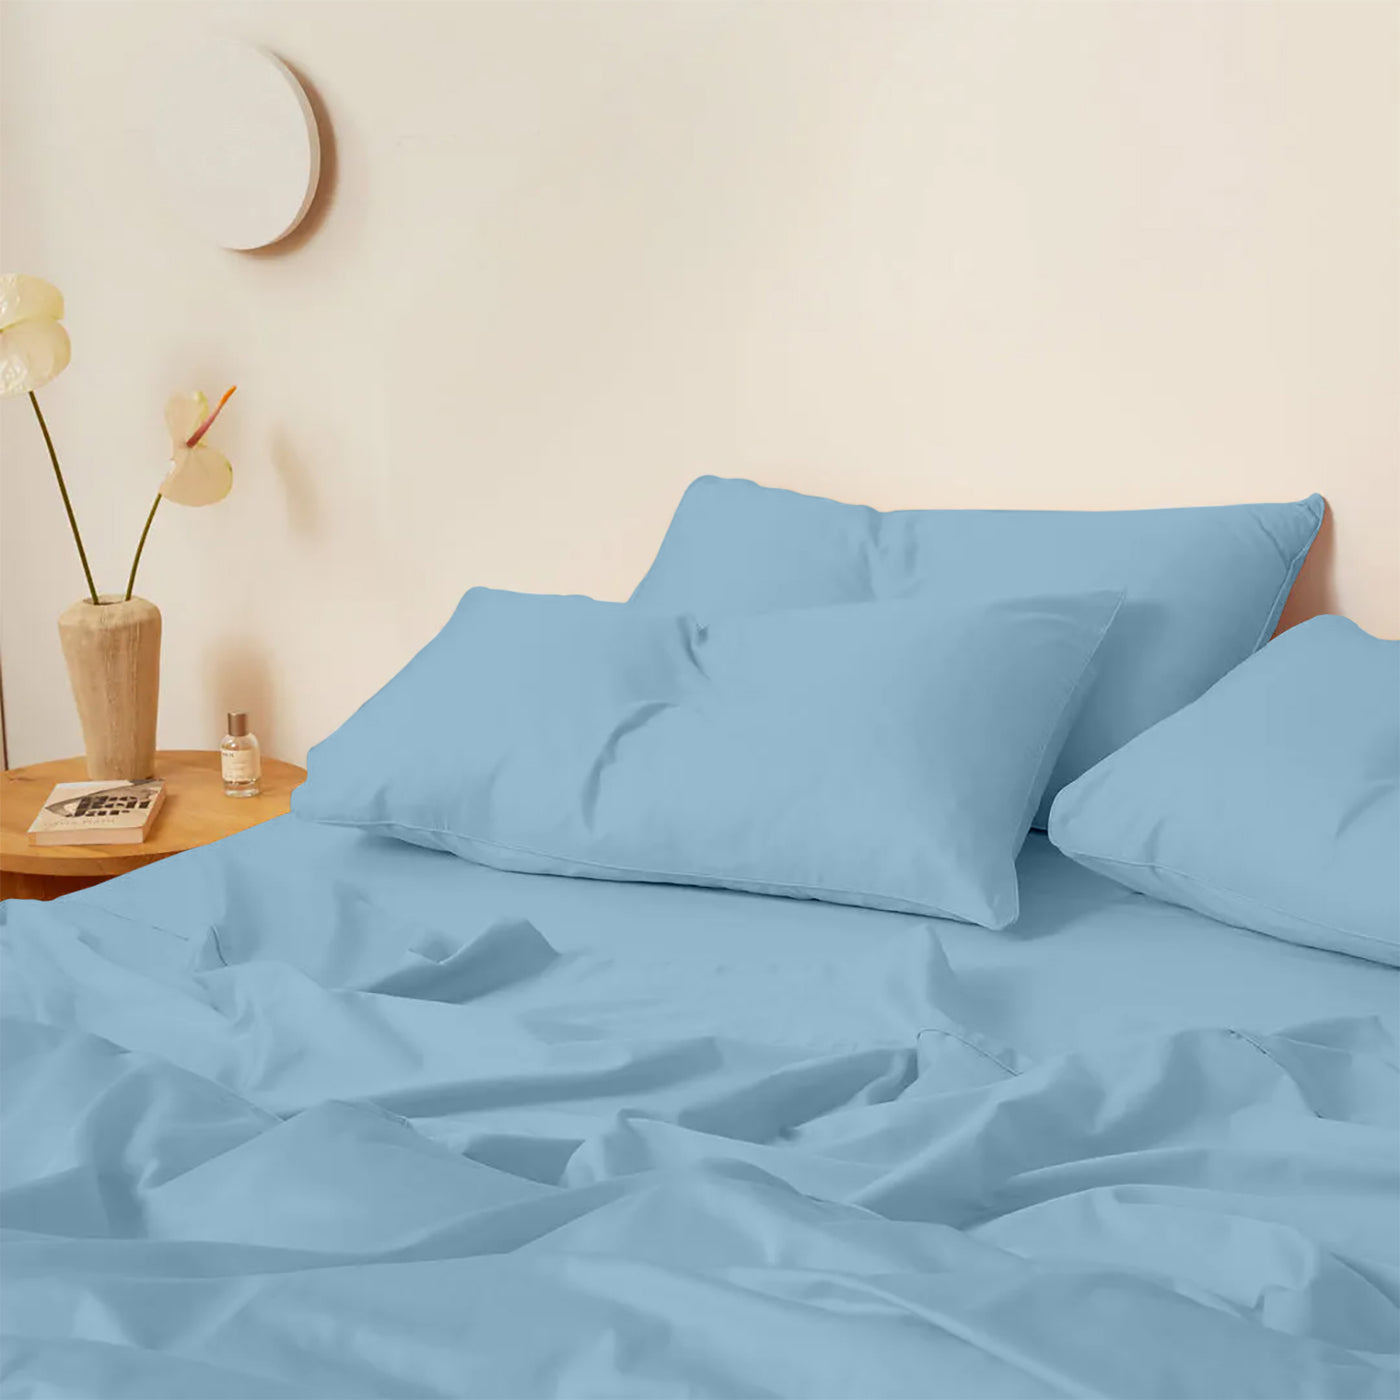 Buy 4 Piece Solid Bed Sheet Set Online at Kotton Culture USA